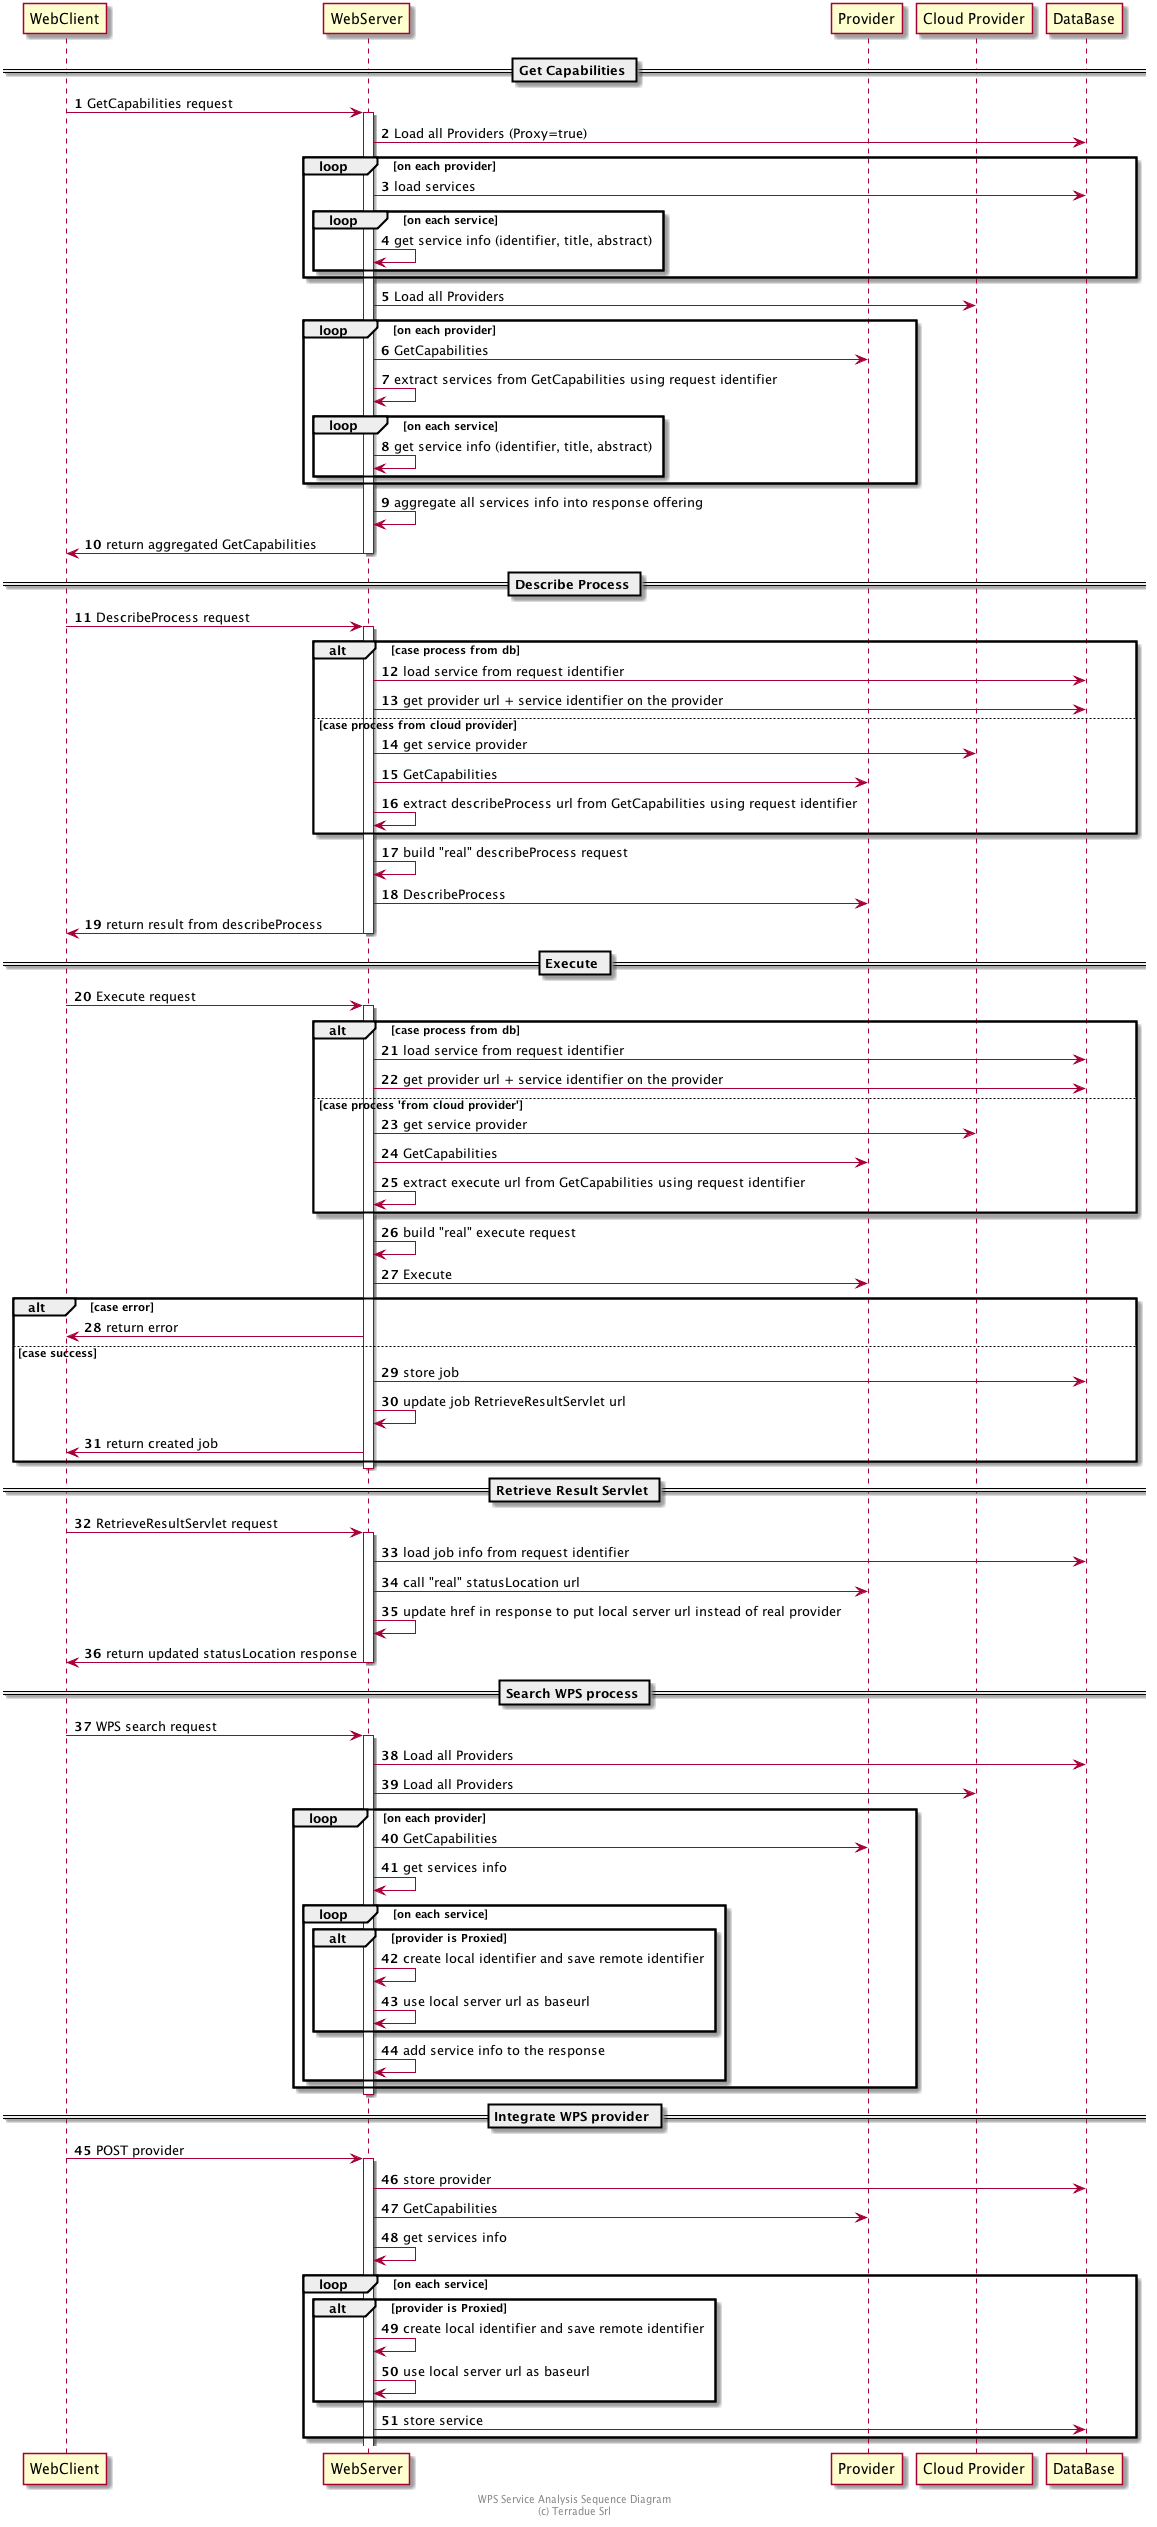 !define DIAG_NAME WPS Service Analysis Sequence Diagram

participant "WebClient" as WC
participant "WebServer" as WS
participant "Provider" as P
participant "Cloud Provider" as C
participant "DataBase" as DB

autonumber

== Get Capabilities ==

WC -> WS: GetCapabilities request
activate WS
WS -> DB: Load all Providers (Proxy=true)
loop on each provider
    WS -> DB: load services
    loop on each service
        WS -> WS: get service info (identifier, title, abstract)
    end
end
WS -> C: Load all Providers
loop on each provider
    WS -> P: GetCapabilities
    WS -> WS: extract services from GetCapabilities using request identifier
    loop on each service
        WS -> WS: get service info (identifier, title, abstract)
    end
end
WS -> WS: aggregate all services info into response offering
WS -> WC: return aggregated GetCapabilities
deactivate WS

== Describe Process ==

WC -> WS: DescribeProcess request
activate WS
alt case process from db
    WS -> DB: load service from request identifier
    WS -> DB: get provider url + service identifier on the provider
else case process from cloud provider
    WS -> C: get service provider
    WS -> P: GetCapabilities
    WS -> WS: extract describeProcess url from GetCapabilities using request identifier
end
WS -> WS: build "real" describeProcess request
WS -> P: DescribeProcess
WS -> WC: return result from describeProcess
deactivate WS

== Execute ==

WC -> WS: Execute request
activate WS
alt case process from db
    WS -> DB: load service from request identifier
    WS -> DB: get provider url + service identifier on the provider
else case process 'from cloud provider'
    WS -> C: get service provider
    WS -> P: GetCapabilities
    WS -> WS: extract execute url from GetCapabilities using request identifier
end
WS -> WS: build "real" execute request
WS -> P: Execute
alt case error
    WS -> WC: return error
else case success
    WS -> DB: store job
    WS -> WS: update job RetrieveResultServlet url
    WS -> WC: return created job
end
deactivate WS

== Retrieve Result Servlet ==

WC -> WS: RetrieveResultServlet request
activate WS
WS -> DB: load job info from request identifier
WS -> P: call "real" statusLocation url
WS -> WS: update href in response to put local server url instead of real provider
WS -> WC: return updated statusLocation response
deactivate WS

== Search WPS process ==

WC -> WS: WPS search request
activate WS
WS -> DB: Load all Providers
WS -> C: Load all Providers
loop on each provider
    WS -> P: GetCapabilities
    WS -> WS: get services info
    loop on each service
        alt provider is Proxied
            WS -> WS: create local identifier and save remote identifier
            WS -> WS: use local server url as baseurl
        end
        WS -> WS: add service info to the response
    end
end
deactivate WS

== Integrate WPS provider ==

WC -> WS: POST provider
activate WS
WS -> DB: store provider
WS -> P: GetCapabilities
WS -> WS: get services info
loop on each service
    alt provider is Proxied
        WS -> WS: create local identifier and save remote identifier
        WS -> WS: use local server url as baseurl
    end
    WS -> DB: store service
end


footer
DIAG_NAME
(c) Terradue Srl
endfooter